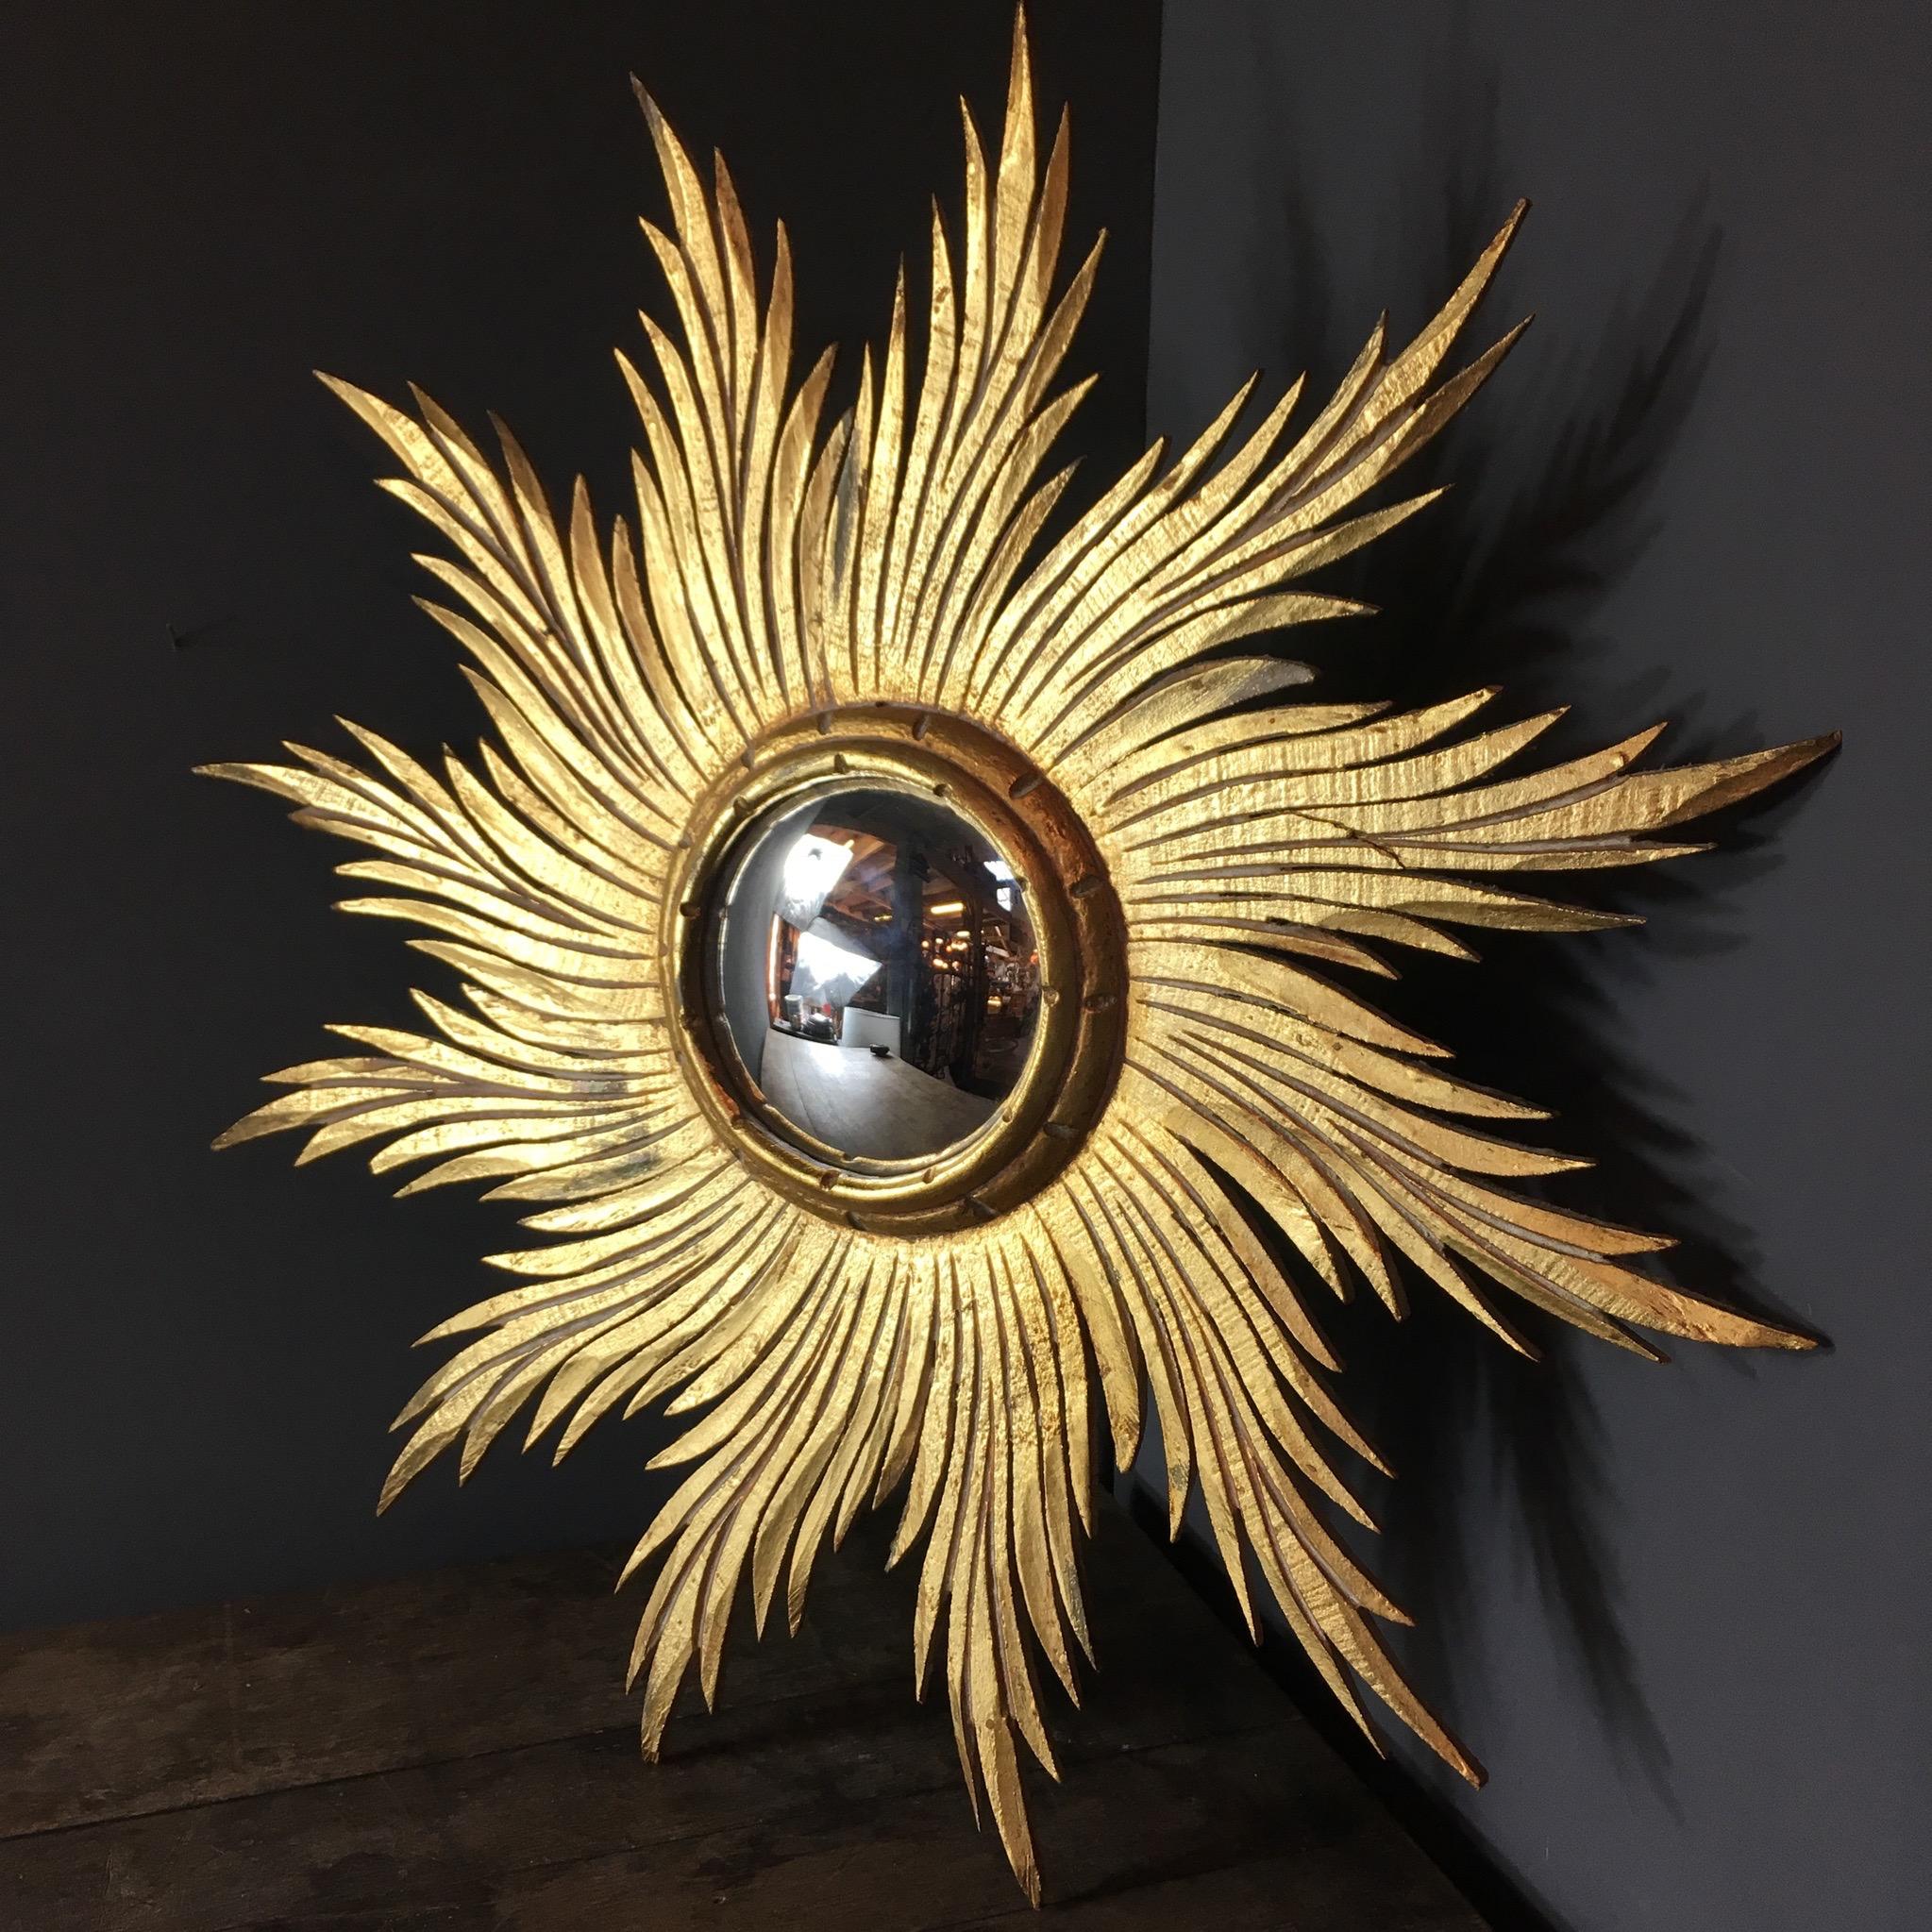 Antique Spanish wooden sunburst Mirror

Convex mirror

Beautiful spiked rays emit from the central convex mirror

Measures: 59.5cm width
14.5cm width of convex mirror

Hanging hook on reverse

One of the longest points has lost a small part of its